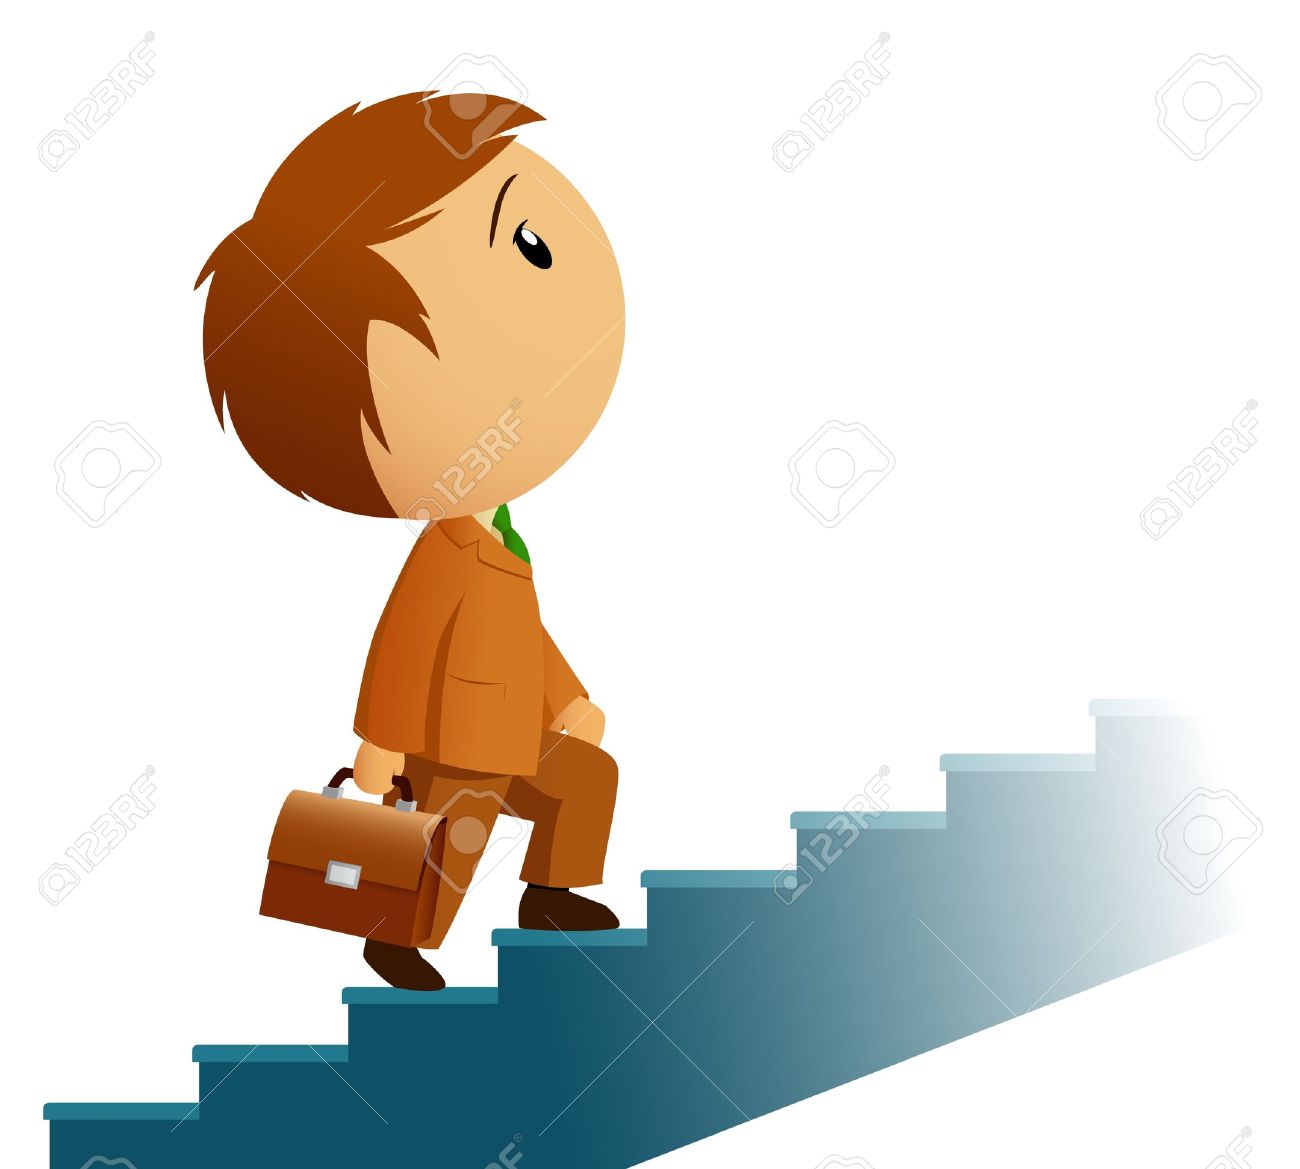 Climbing stairs clipart 5 » Clipart Station.